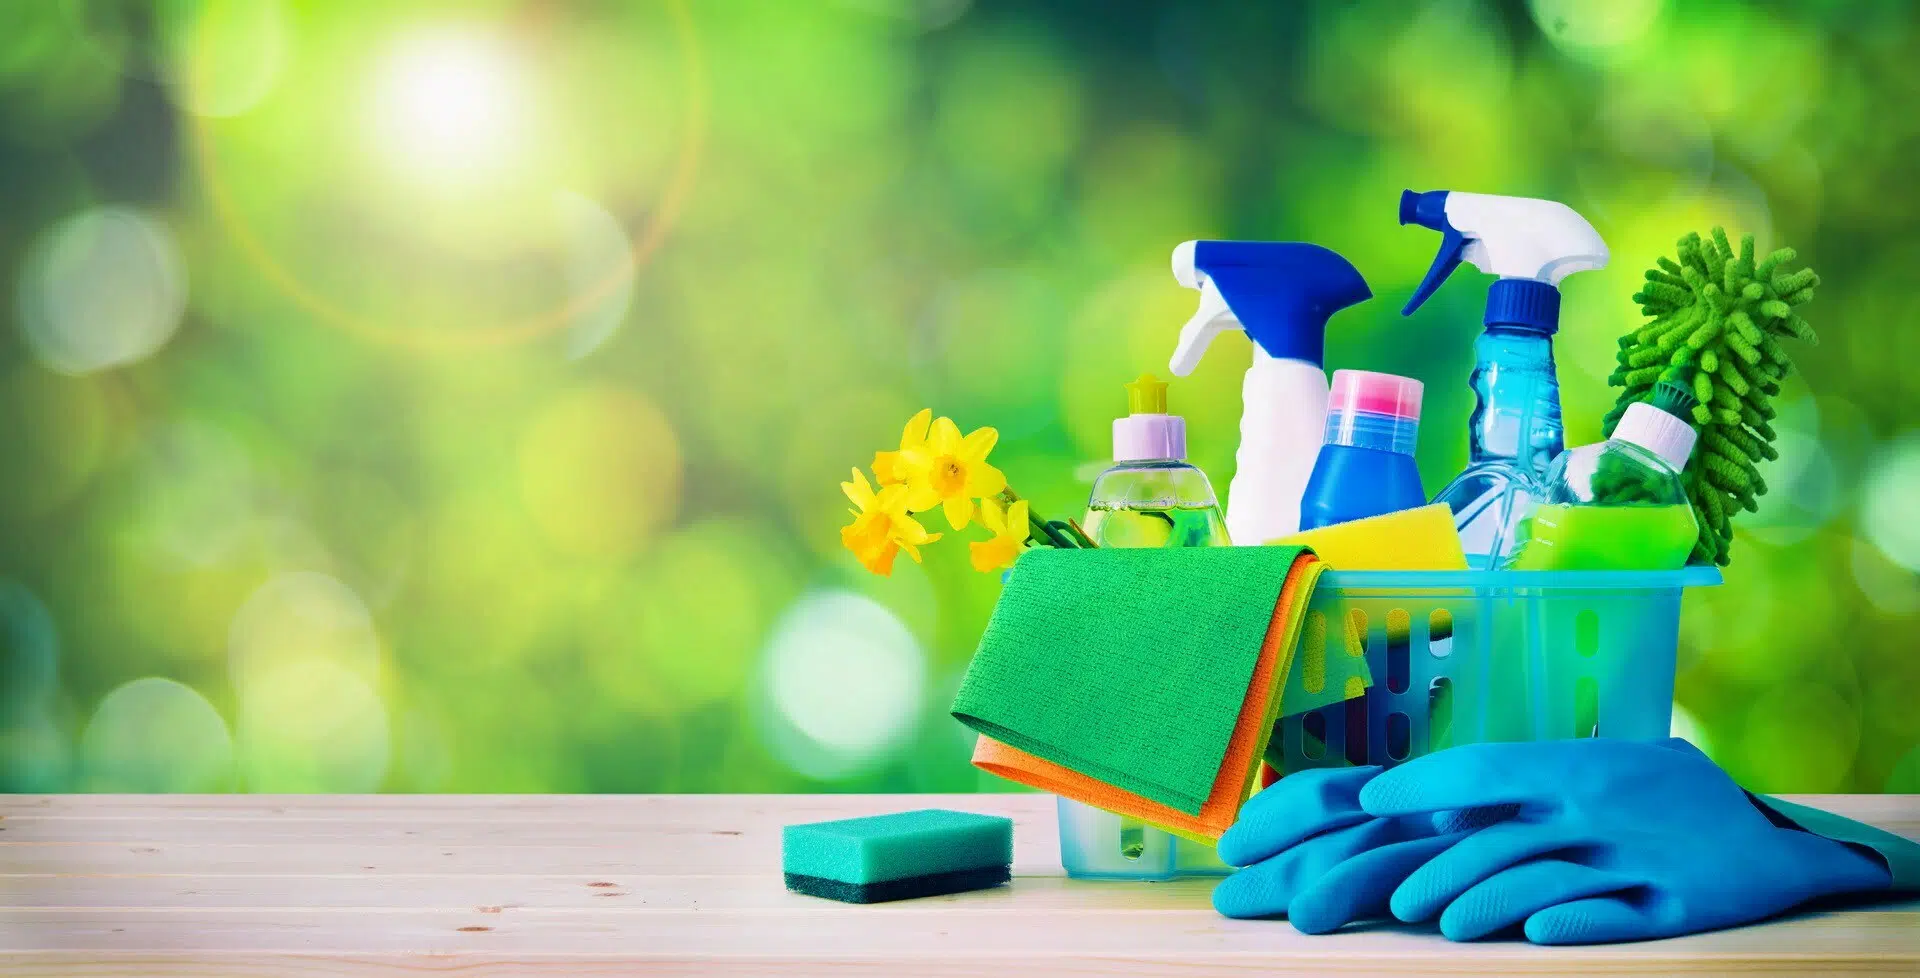 Having A Clean Home Leads To A fuller, Healthier and More Productive Life